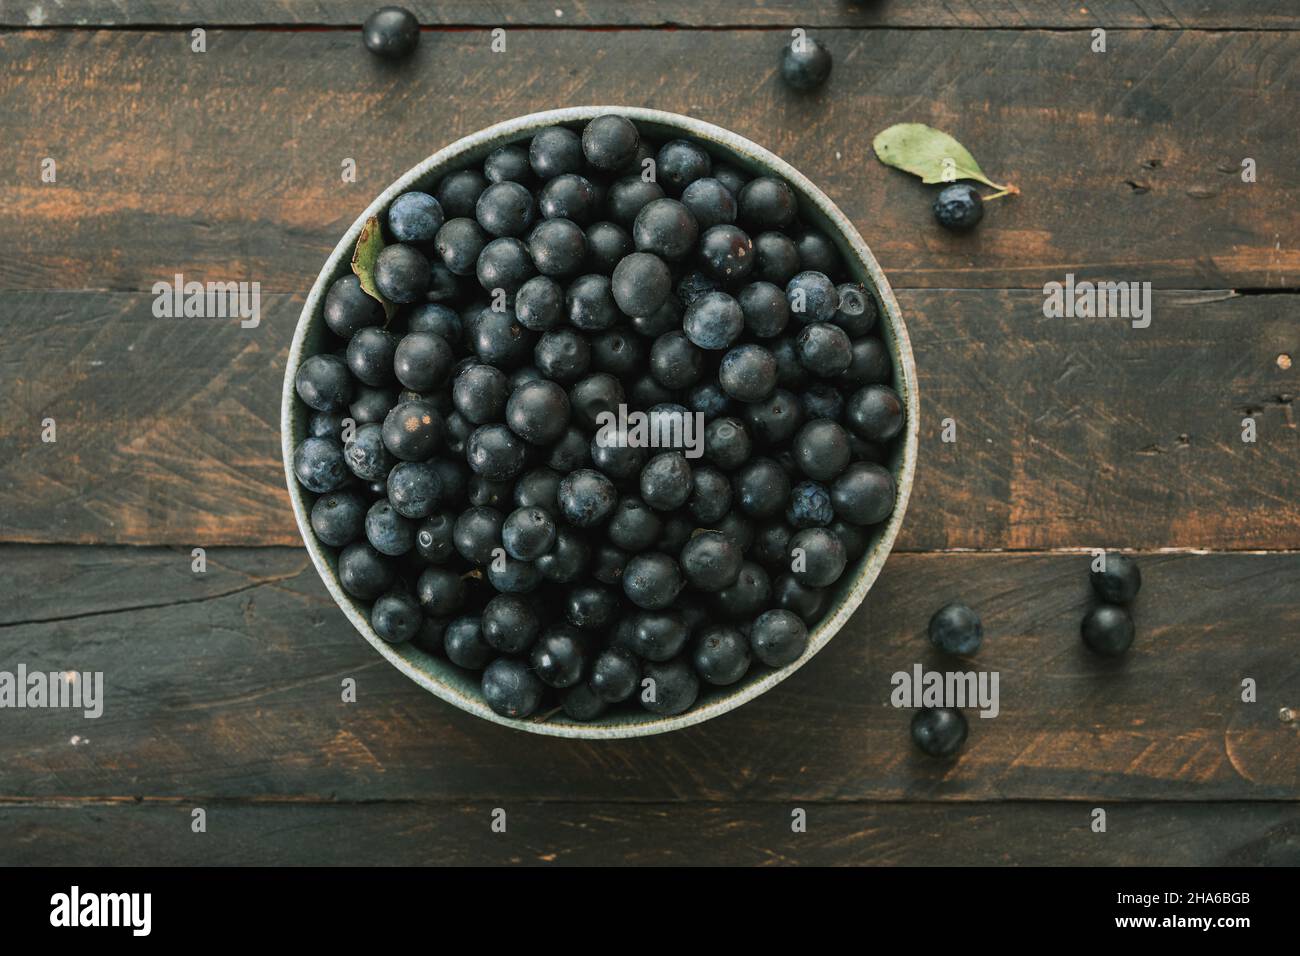 A bowl with sloe (prunus spinosa) black-bluish fruis on dark rustic wooden table background Stock Photo